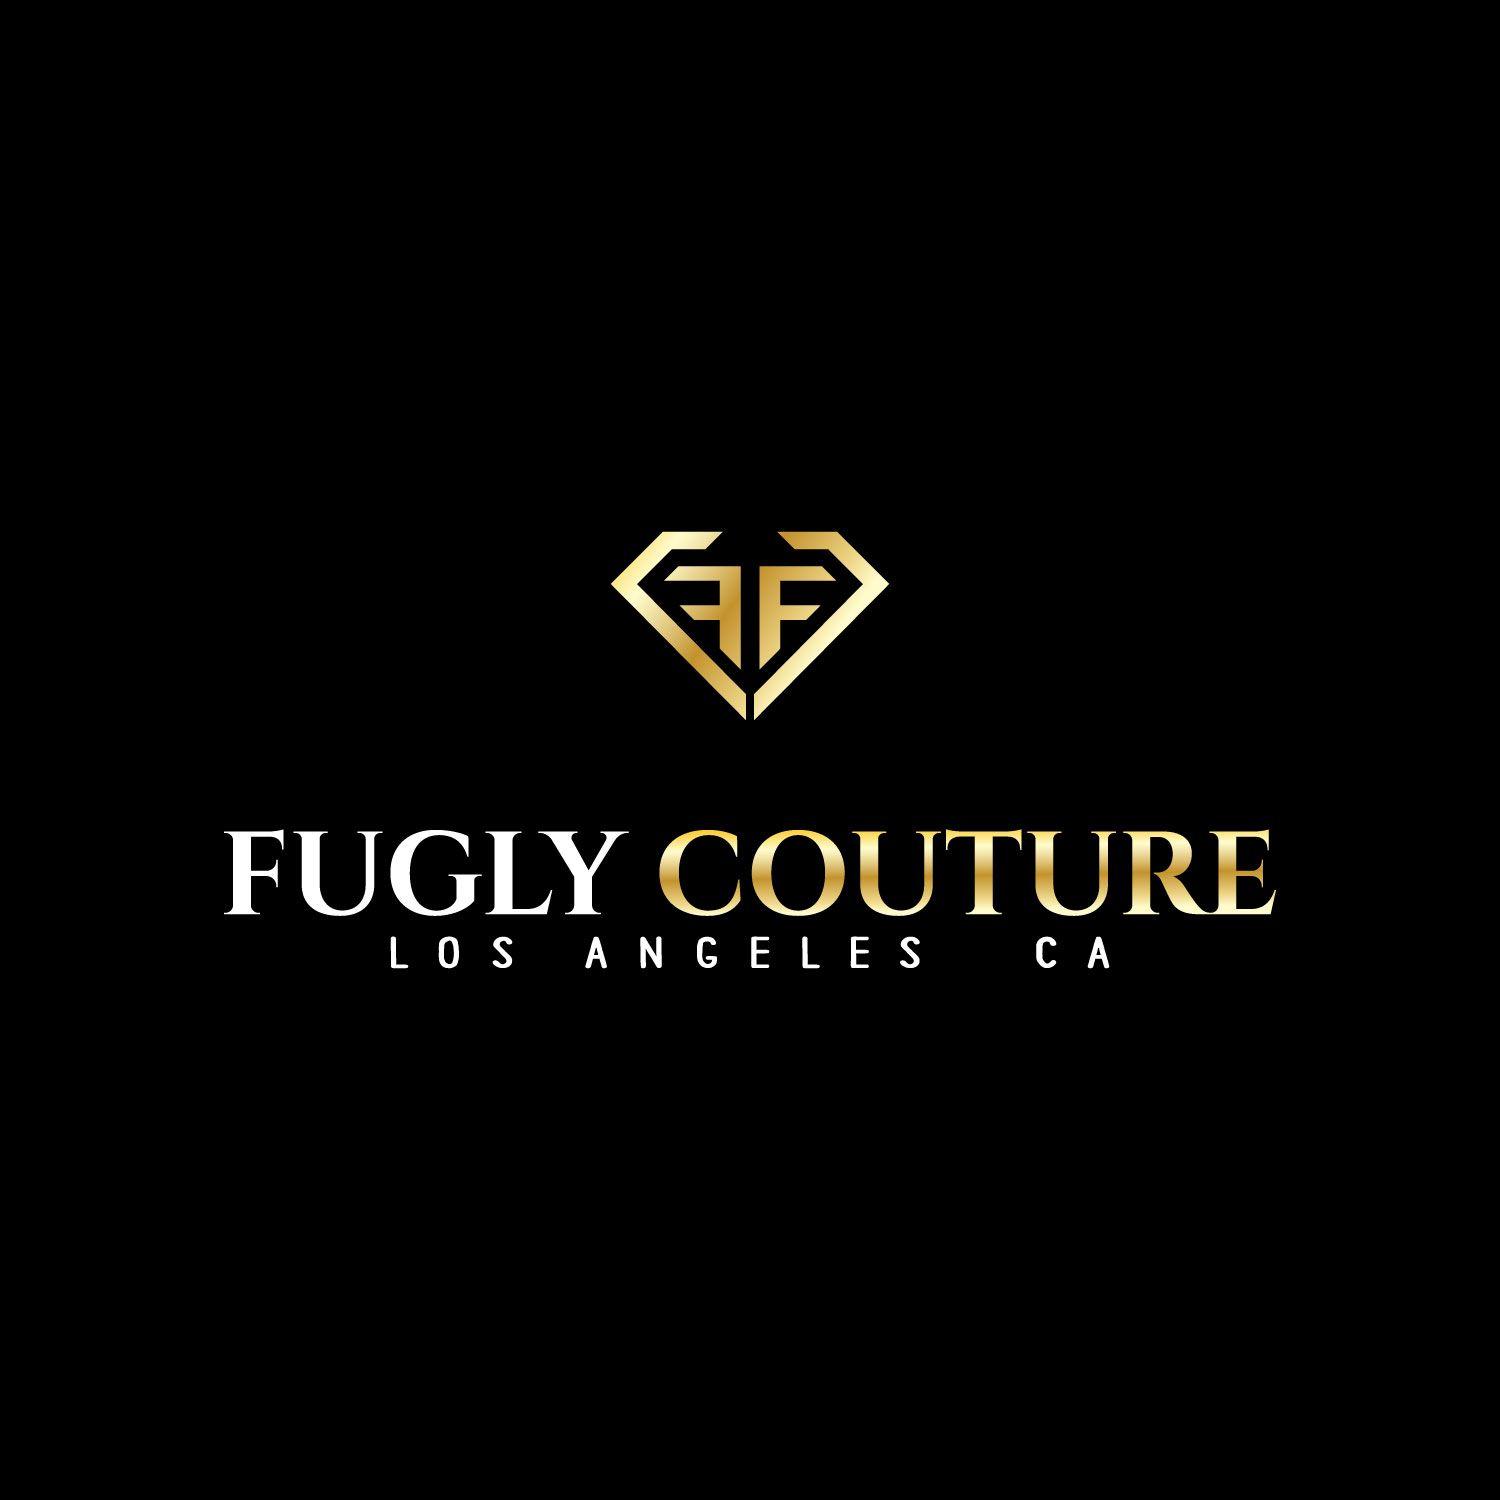 Couture Fashion Logo - Bold, Serious, Fashion Logo Design for FUGLY COUTURE LOS ANGELES, CA